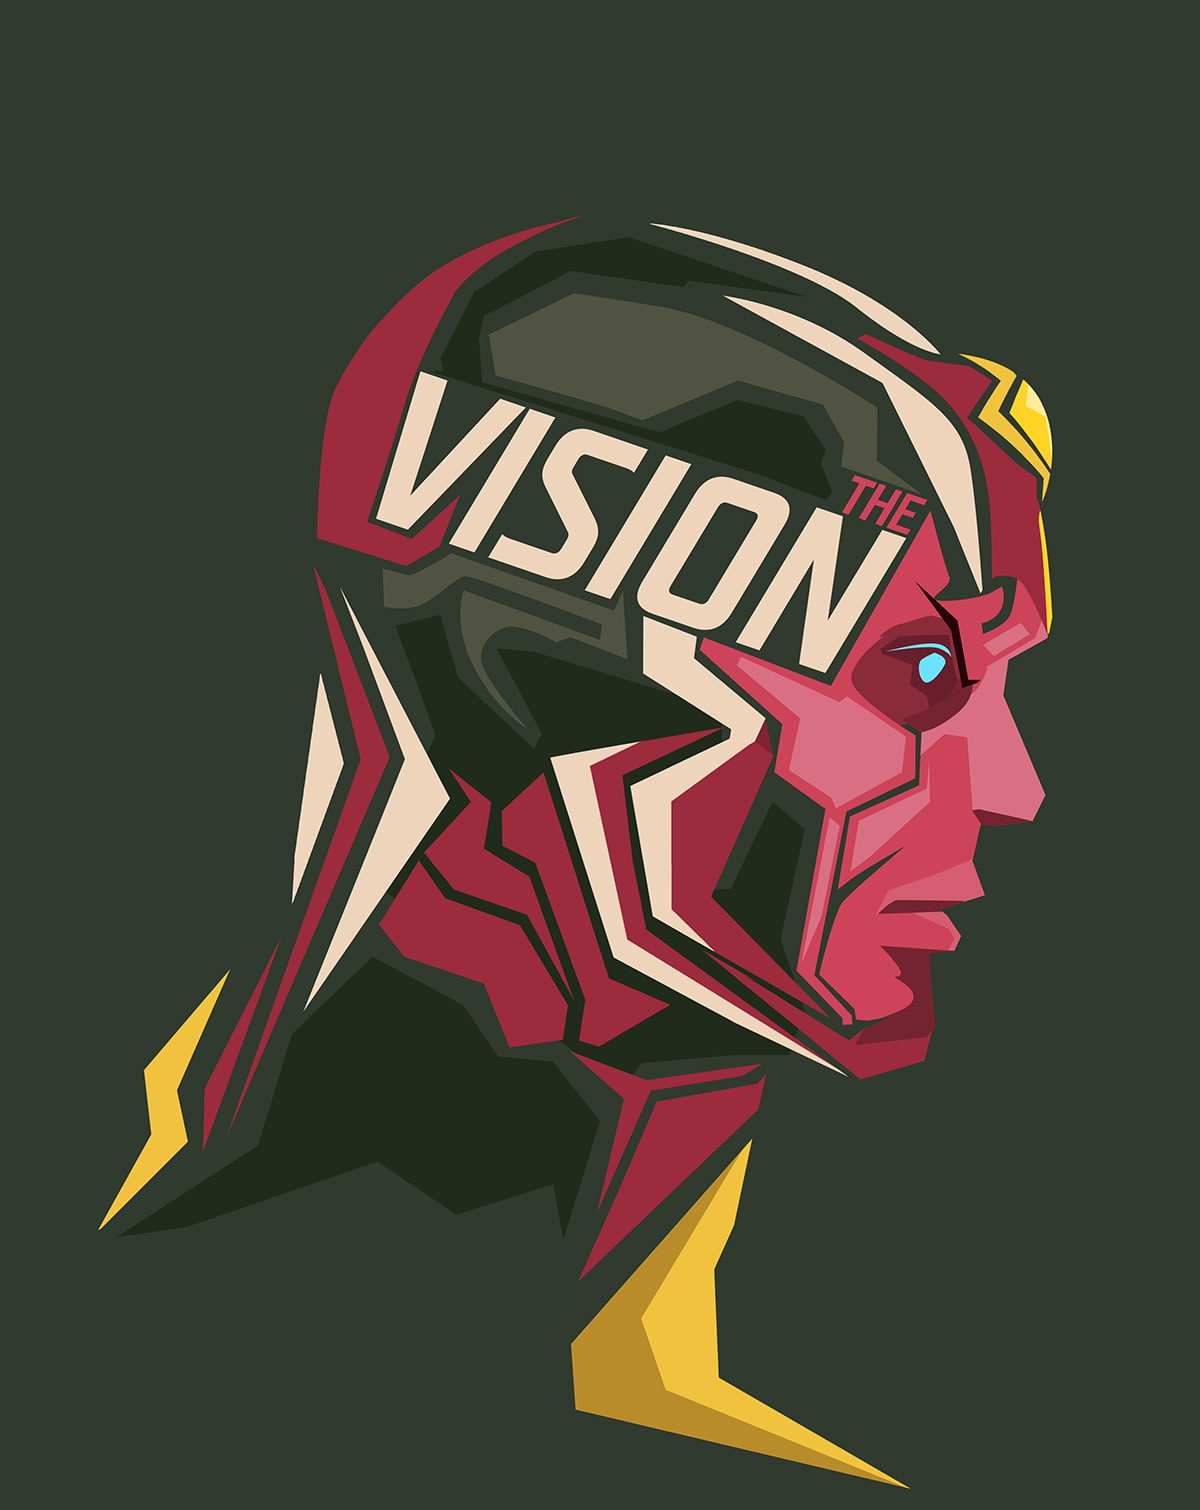 superhero, Marvel Heroes, DC Comics, The Vision, sport, one person